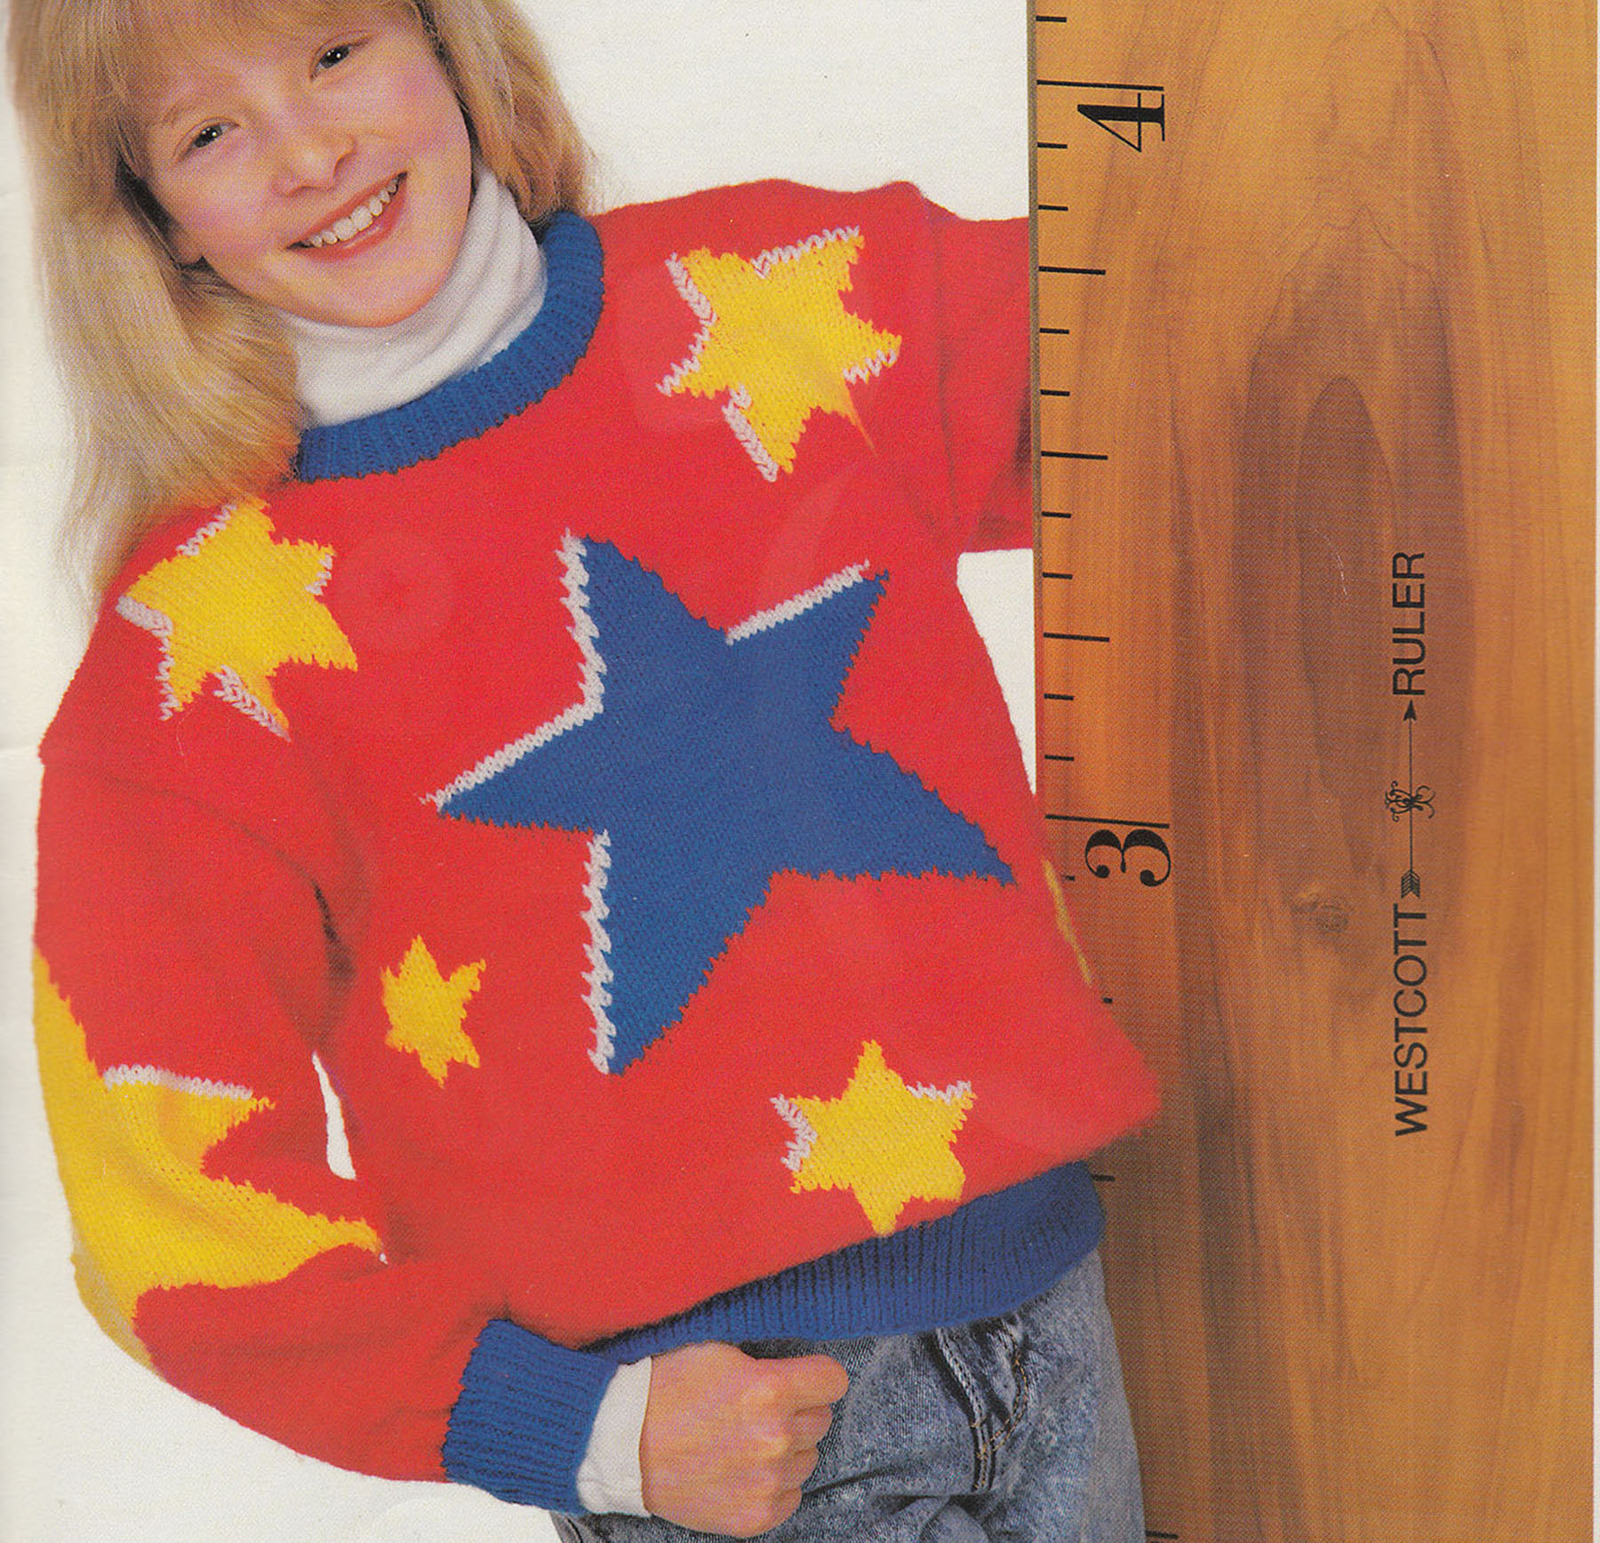 KNIT BOUQUET BIG SHOTS FOR KIDS SPORT WEIGHT CHARACTER DESIGN SWEATERS #1211 - $7.98